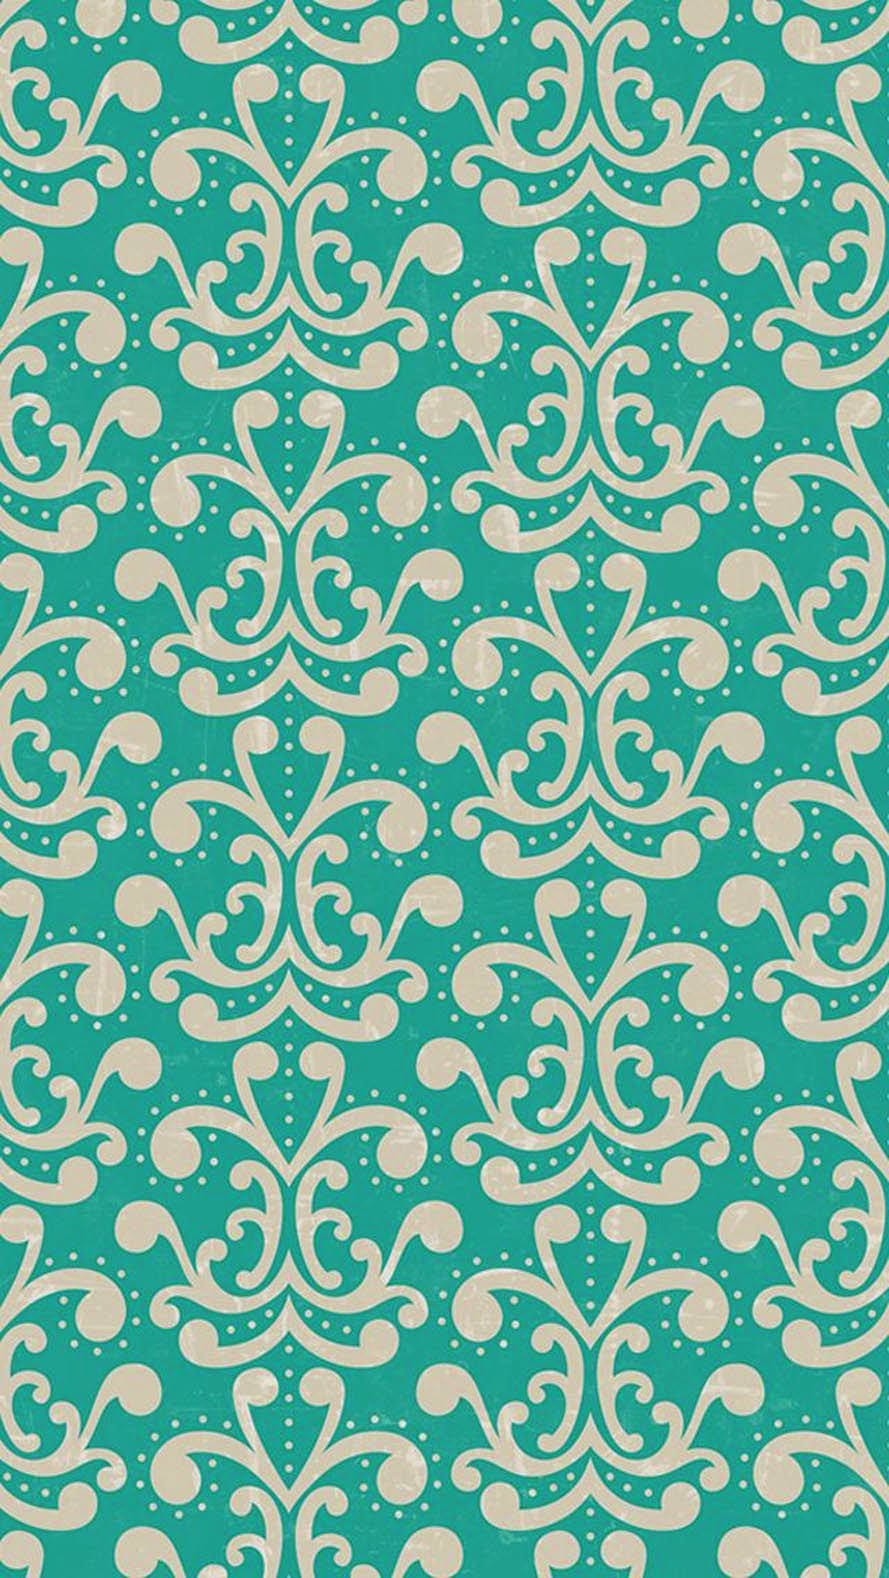 iPhone With Modern Elegant Teal Damask Pattern Is High